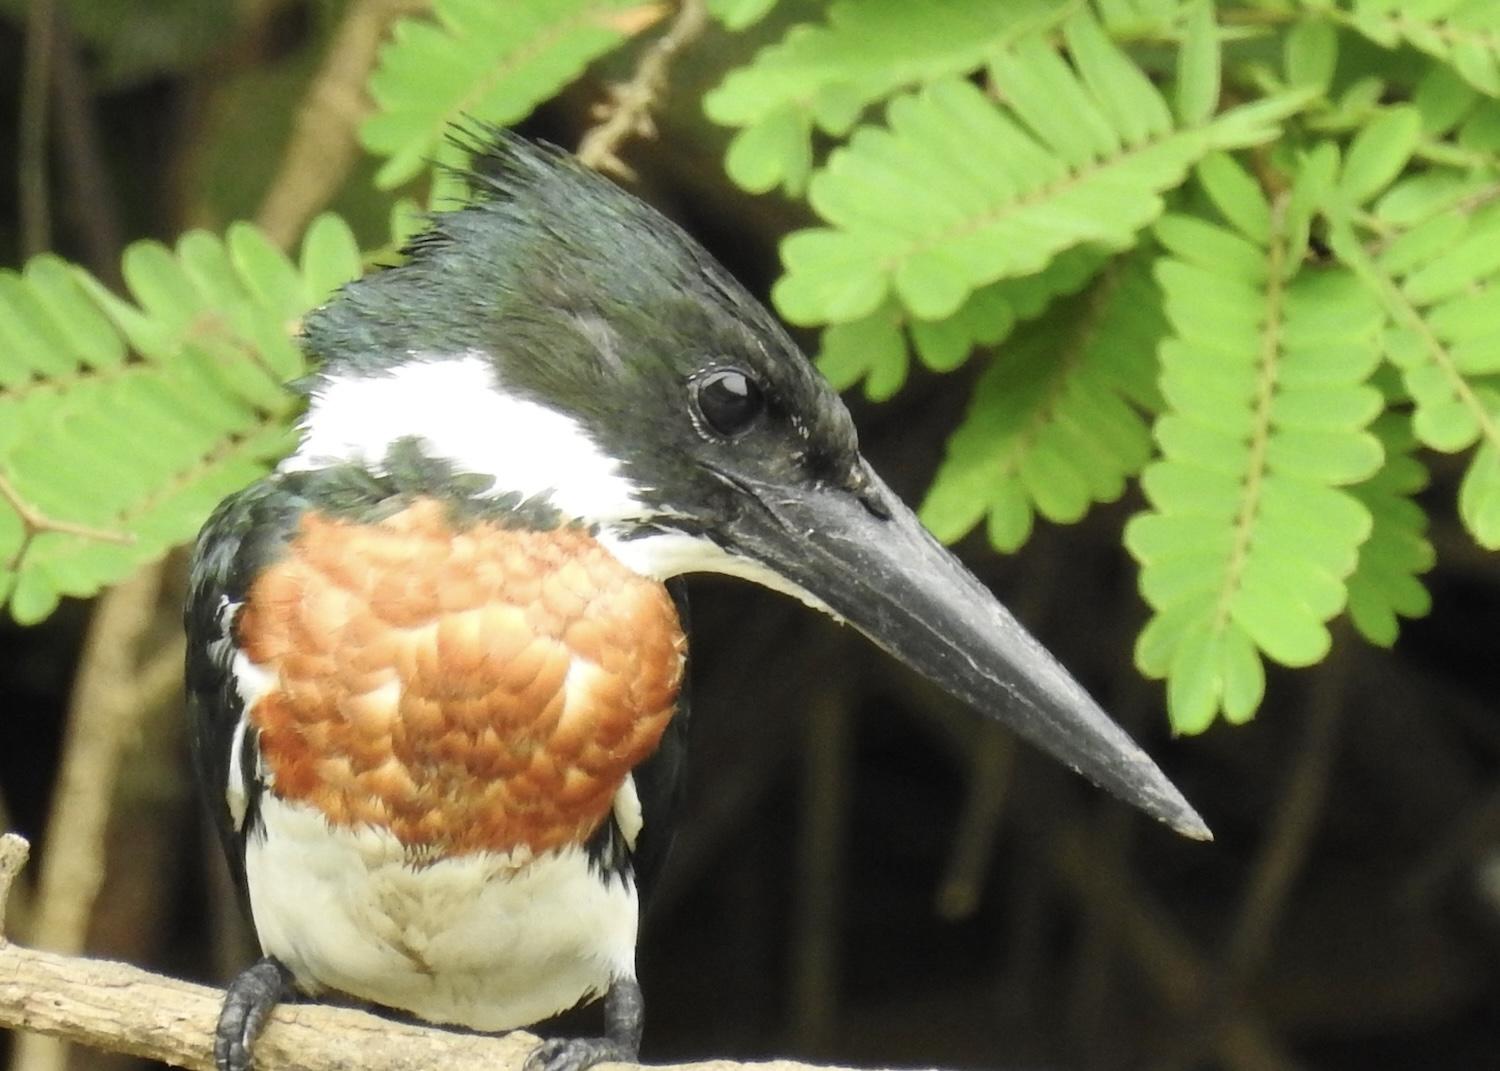 Near Los Chiles, Costa Rica, an Amazon kingfisher is spotted along the river.